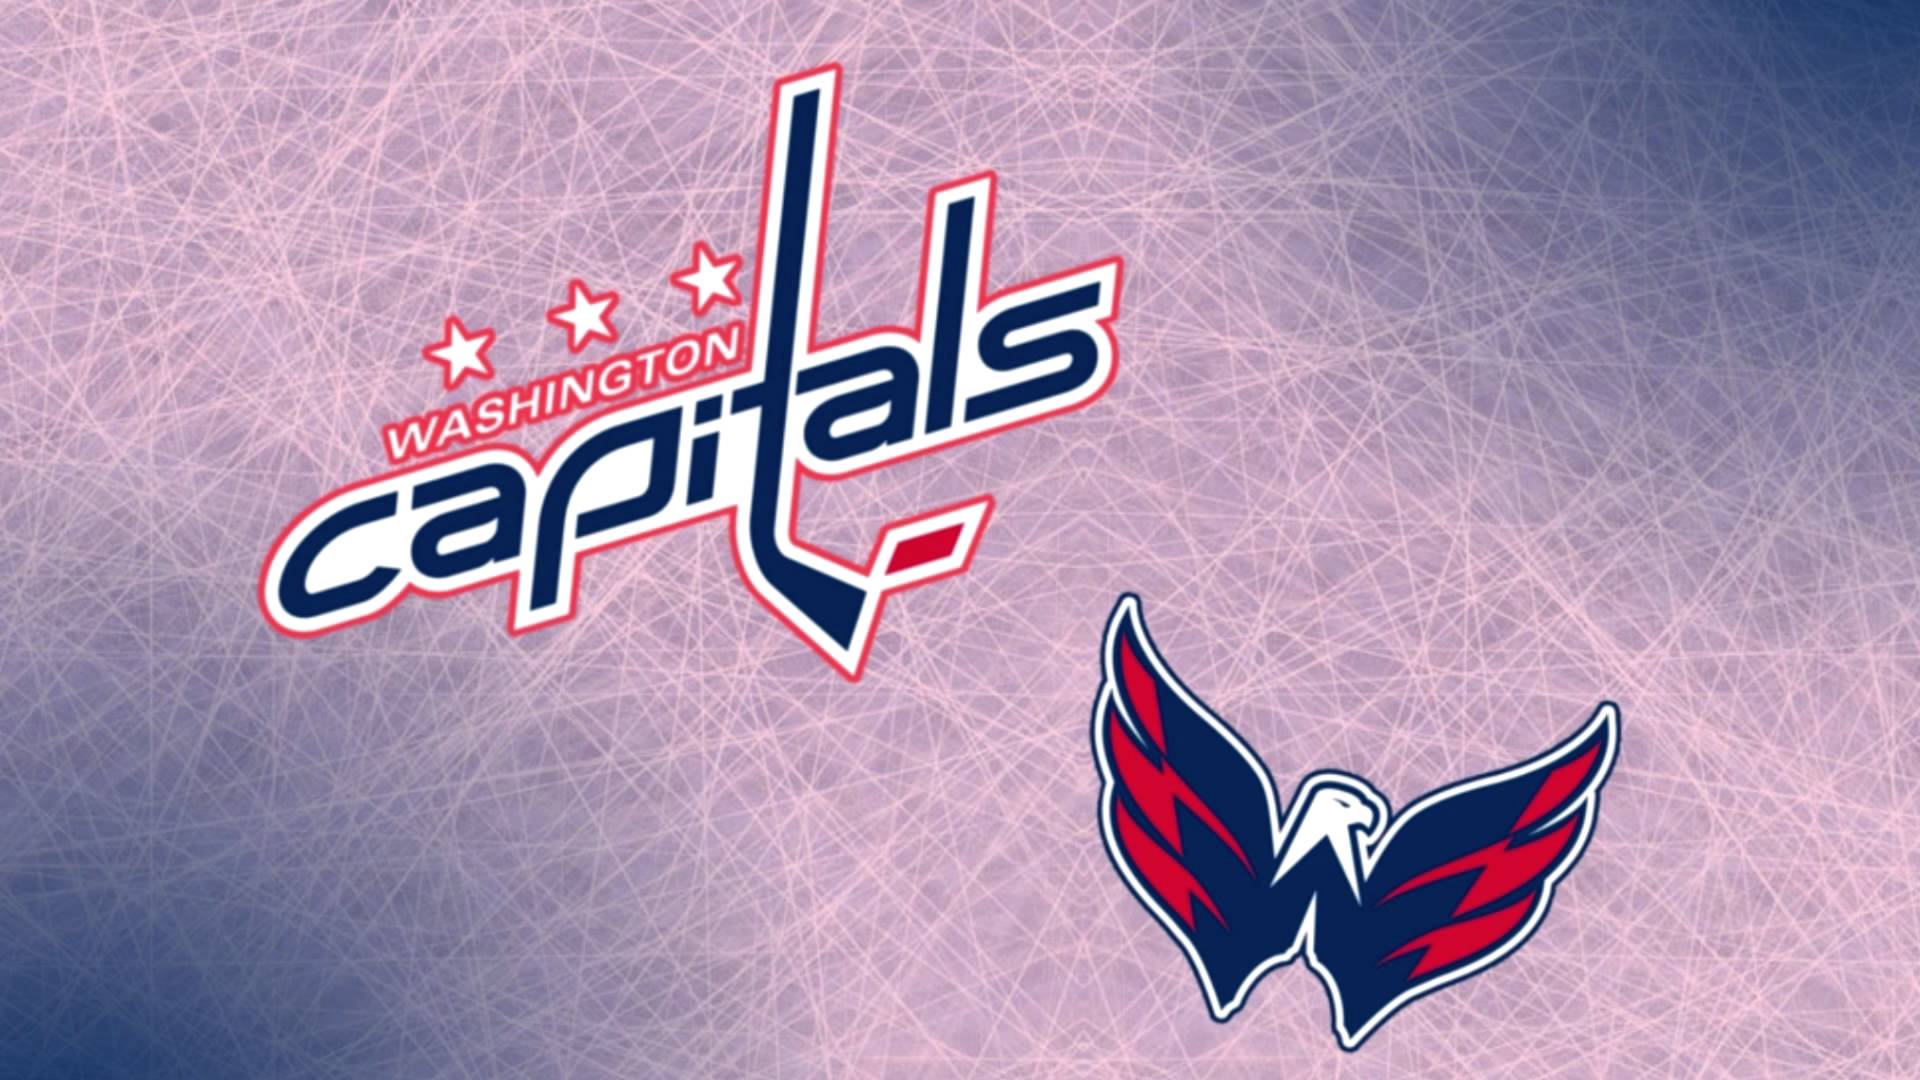 Wallpaper Capitals Caps Hockey designs themes templates and downloadable  graphic elements on Dribbble